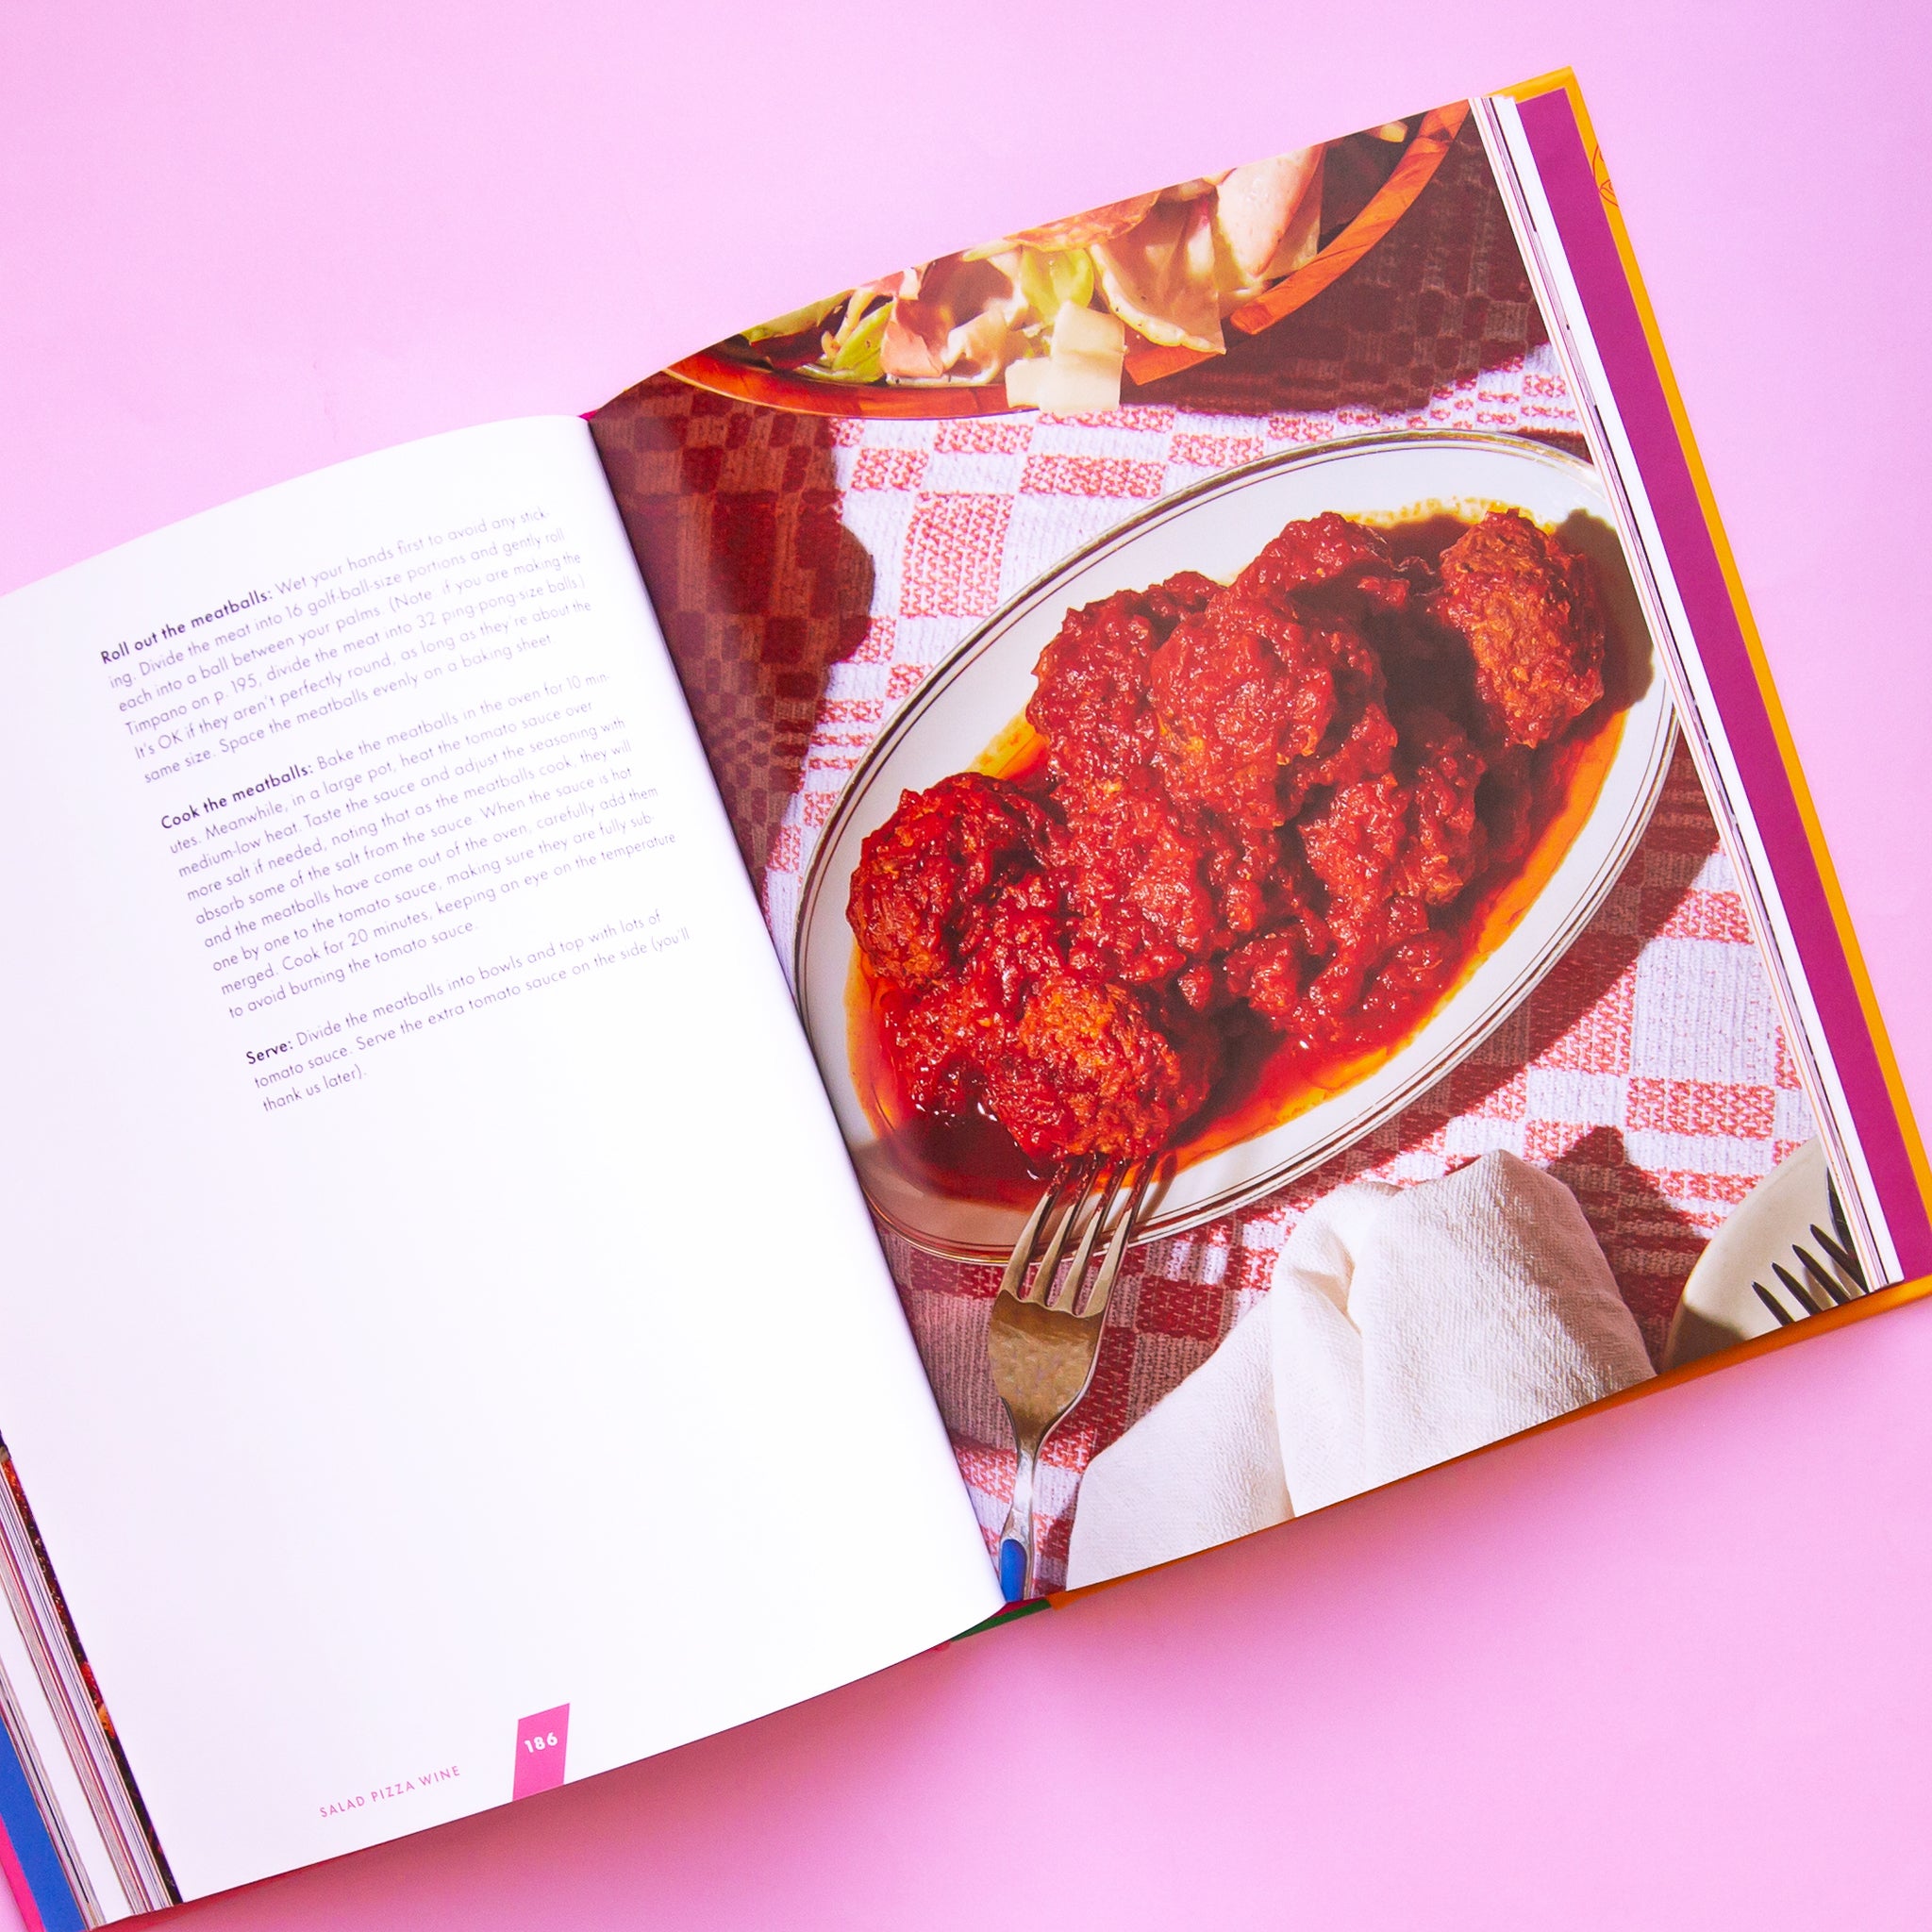 On a pink background is an opened up cook book with text on the left side and a photograph on the other. 